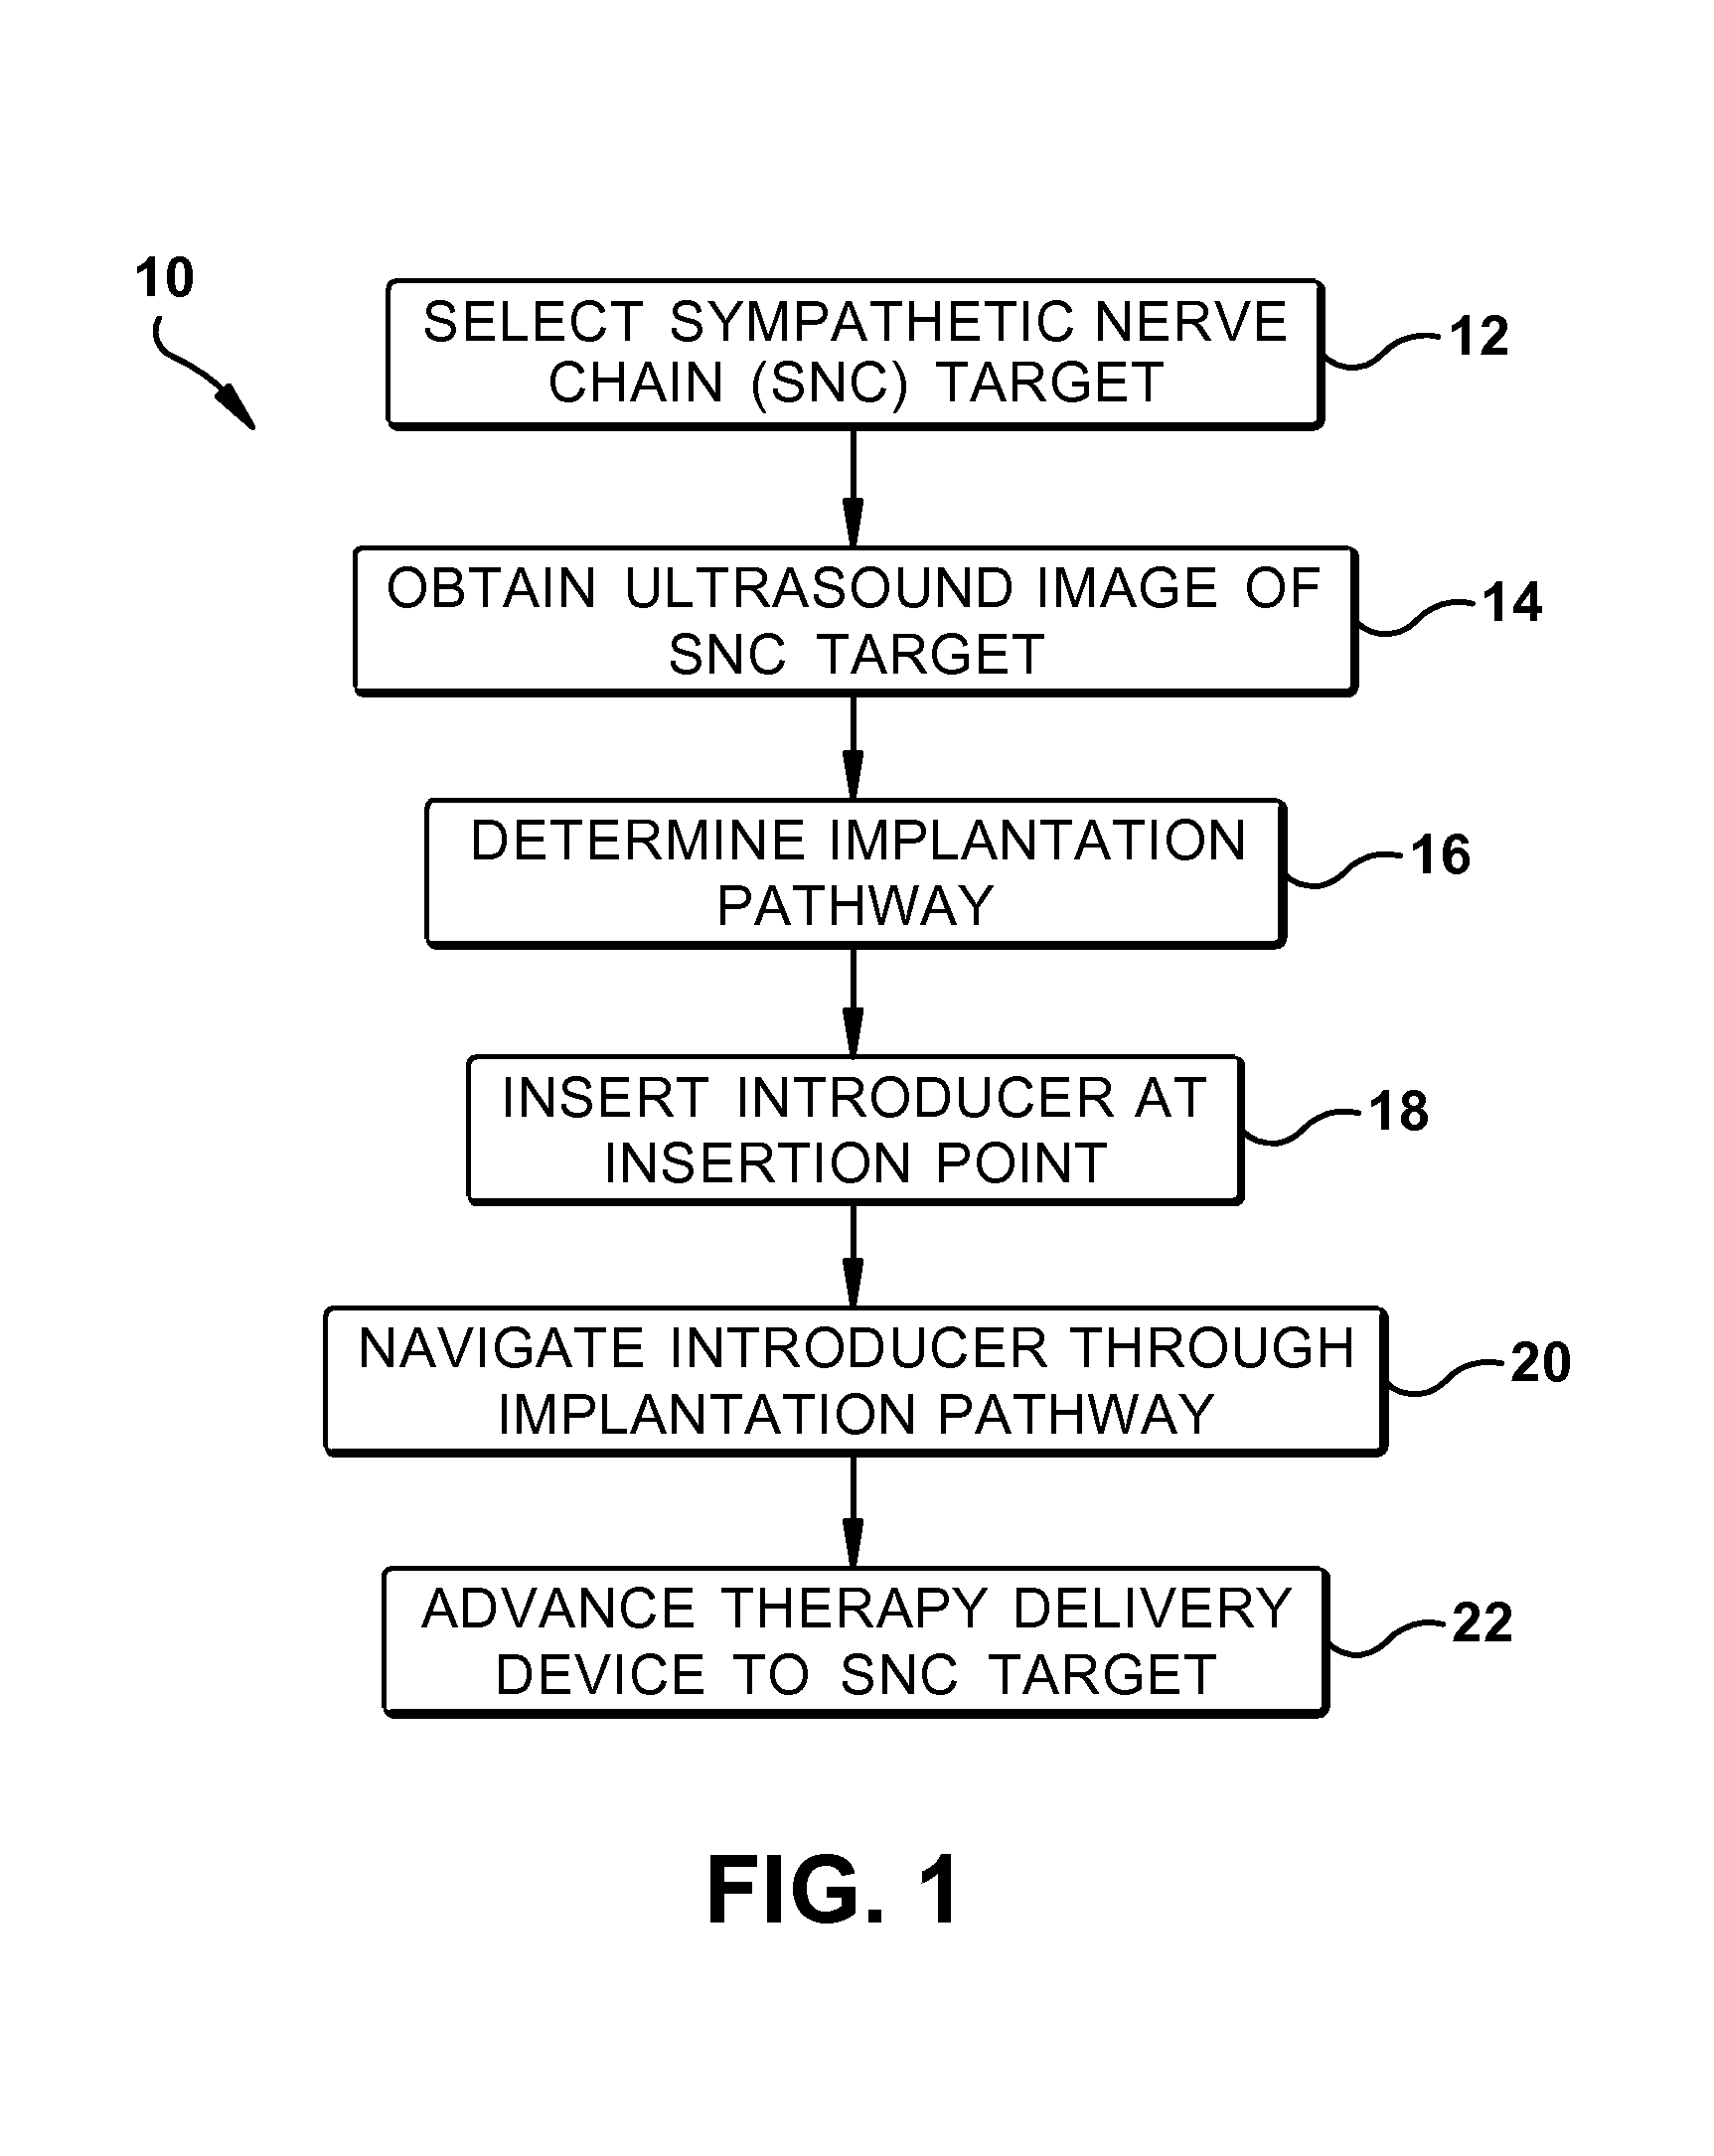 Ultrasound-guided delivery of a therapy delivery device to a nerve target